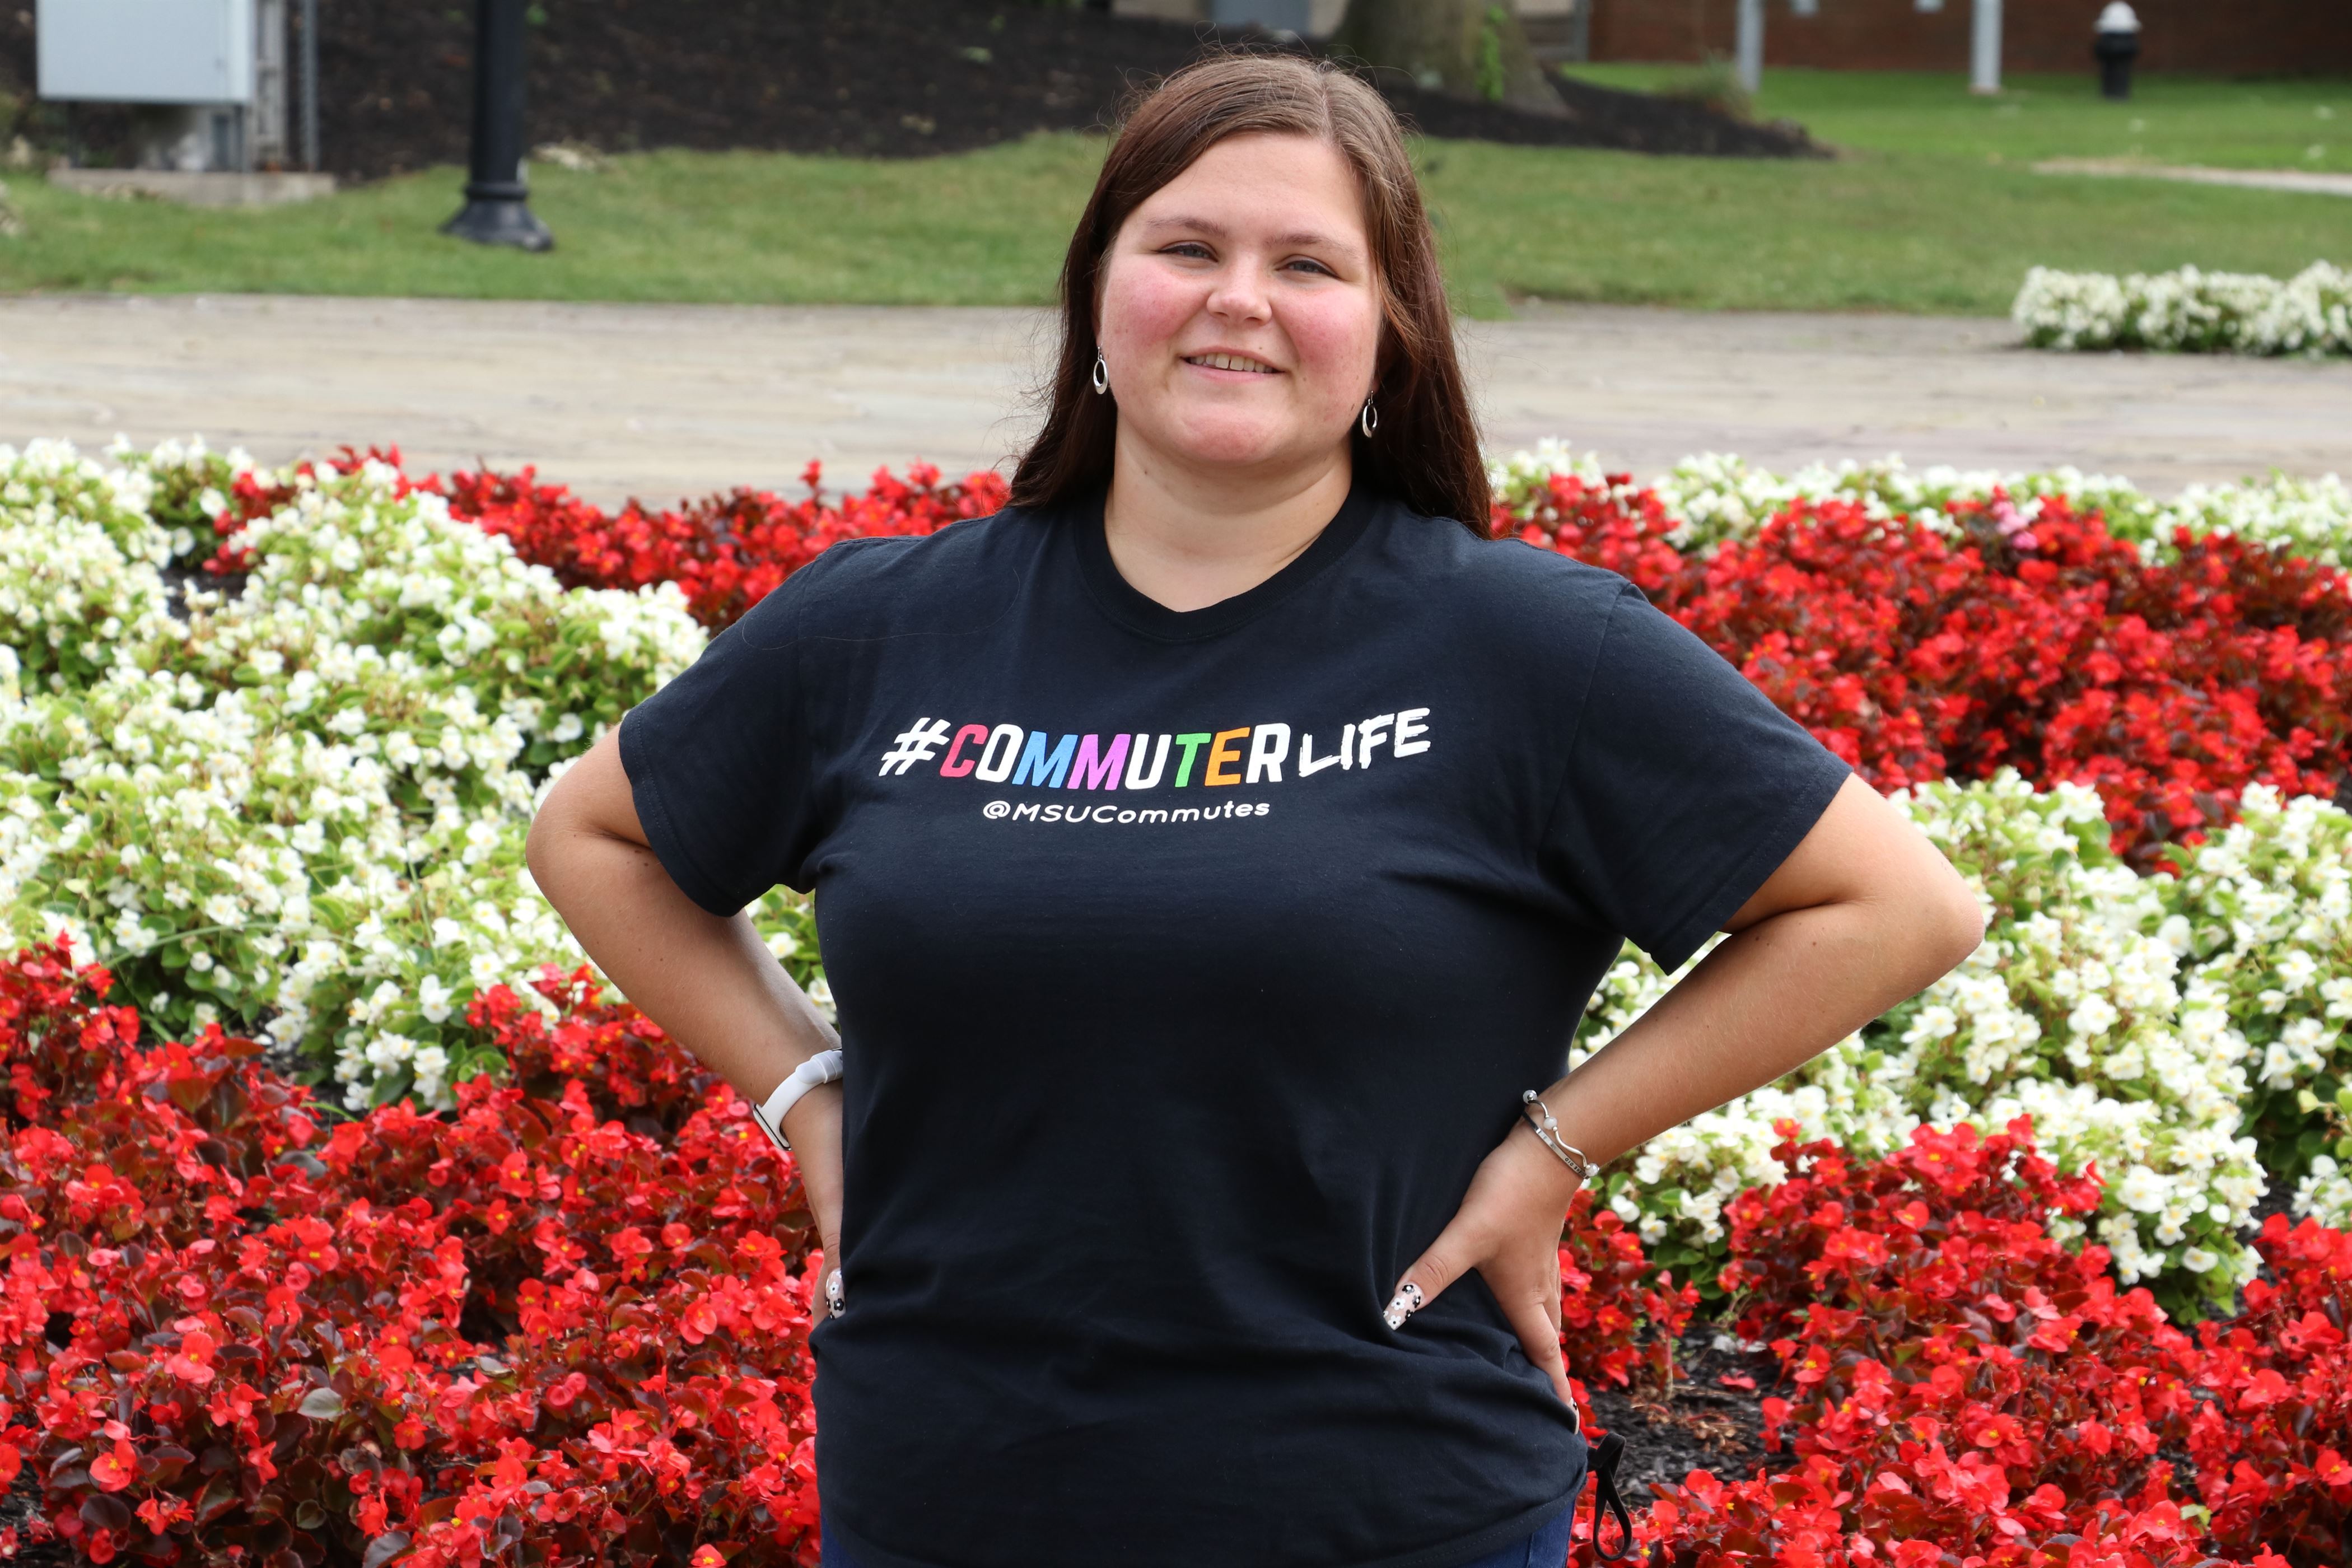 Samantha Ascenzo hopes to spread awareness about events and activities on campus. Photo courtesy of Antonio Talamo